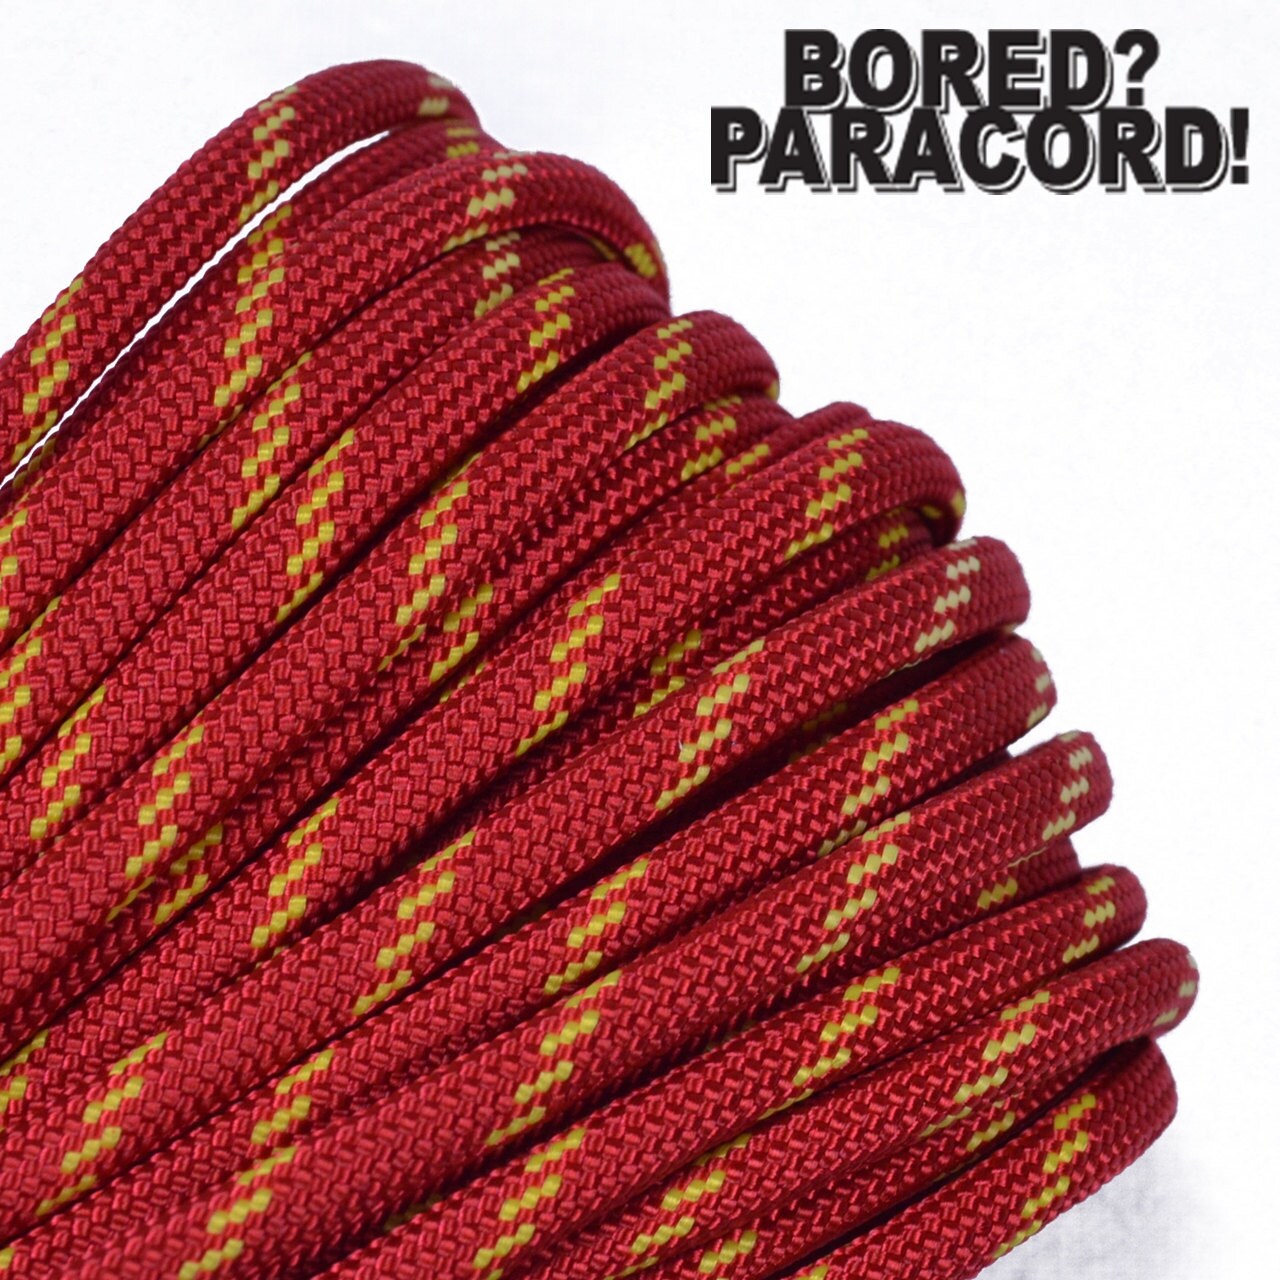 Buy Sunburst 100 Feet / 50 Feet / 25 Feet 550 Paracord for Paracord Crafts  Made in the United States Online in India 